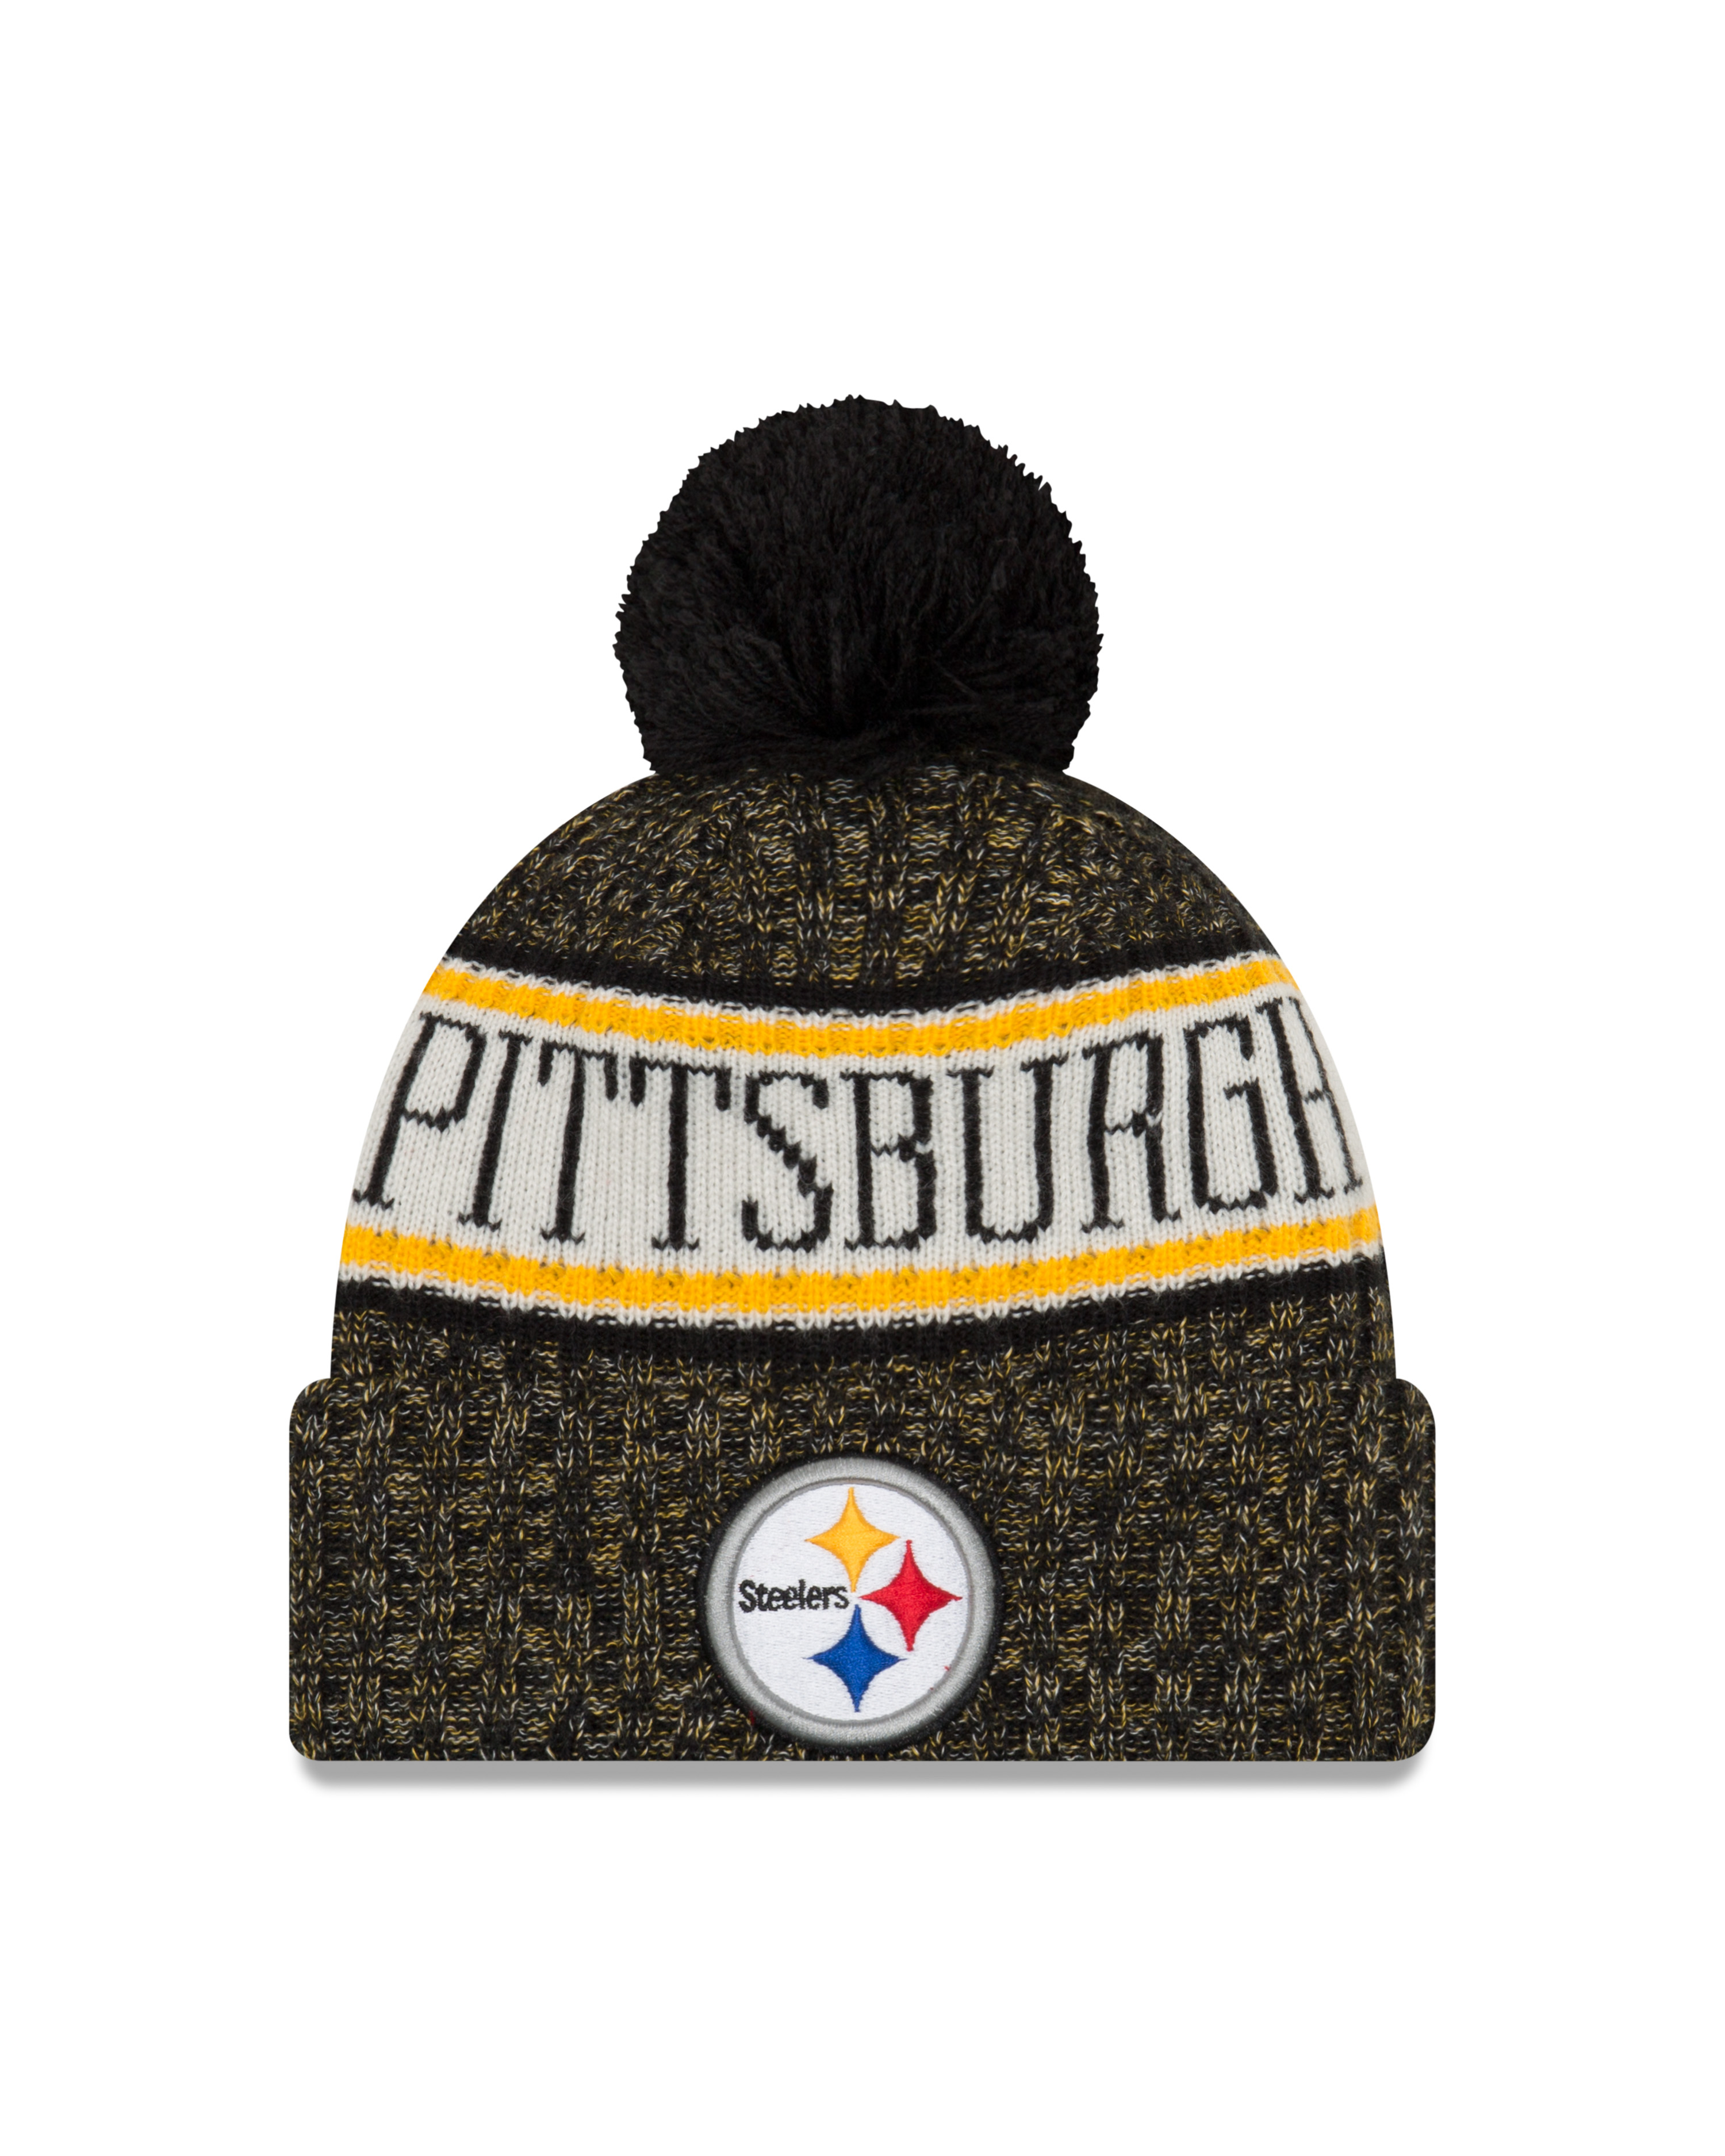 New Era Official NFL Cold Weather Collection #37